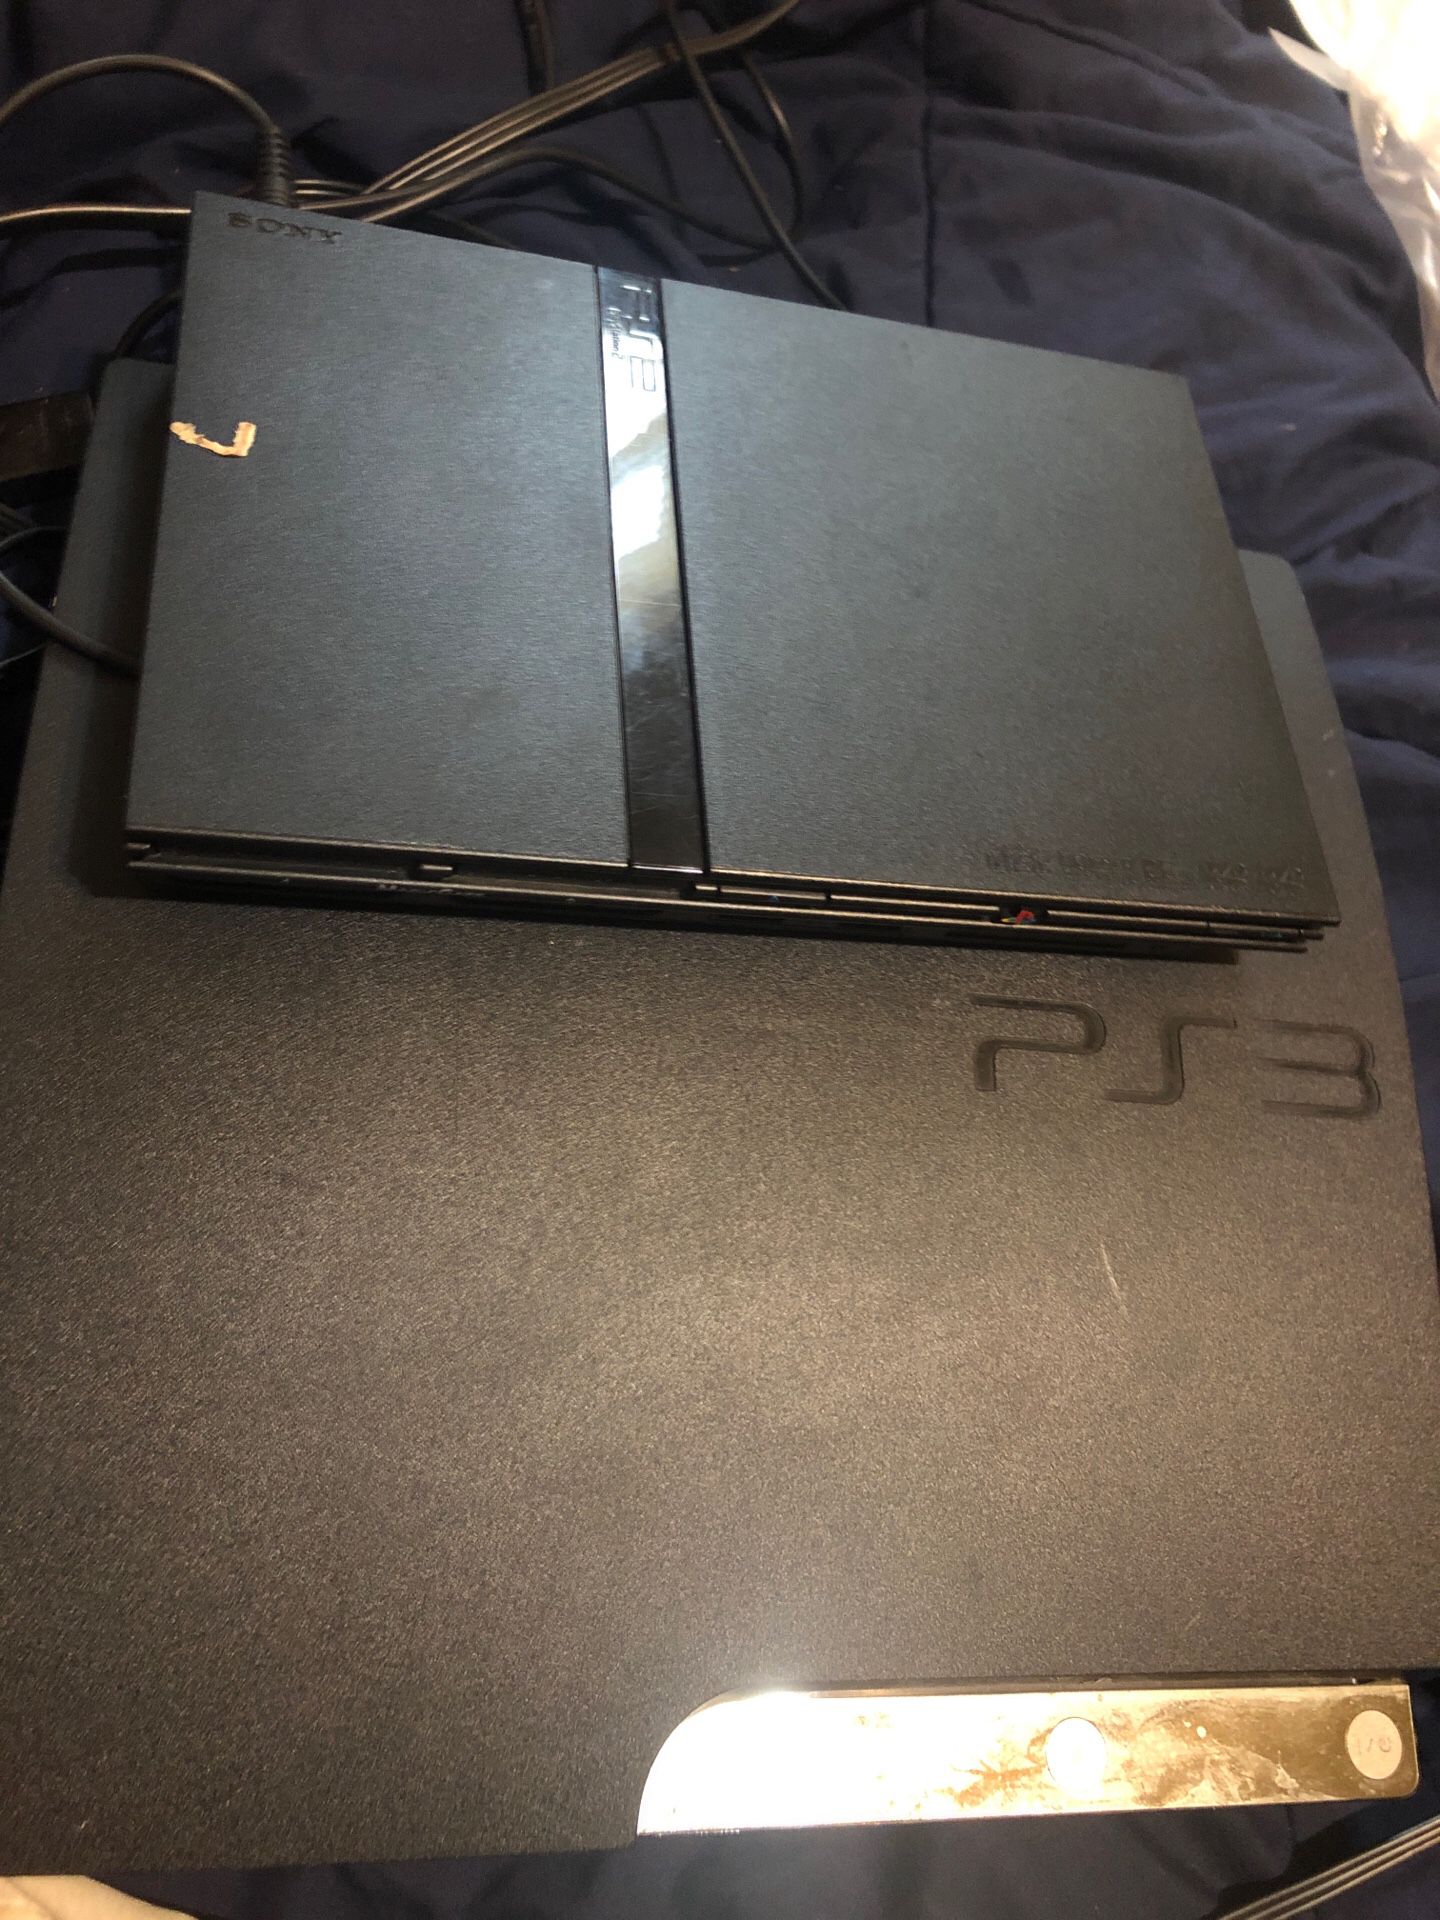 Ps3 and Ps2 bundle.